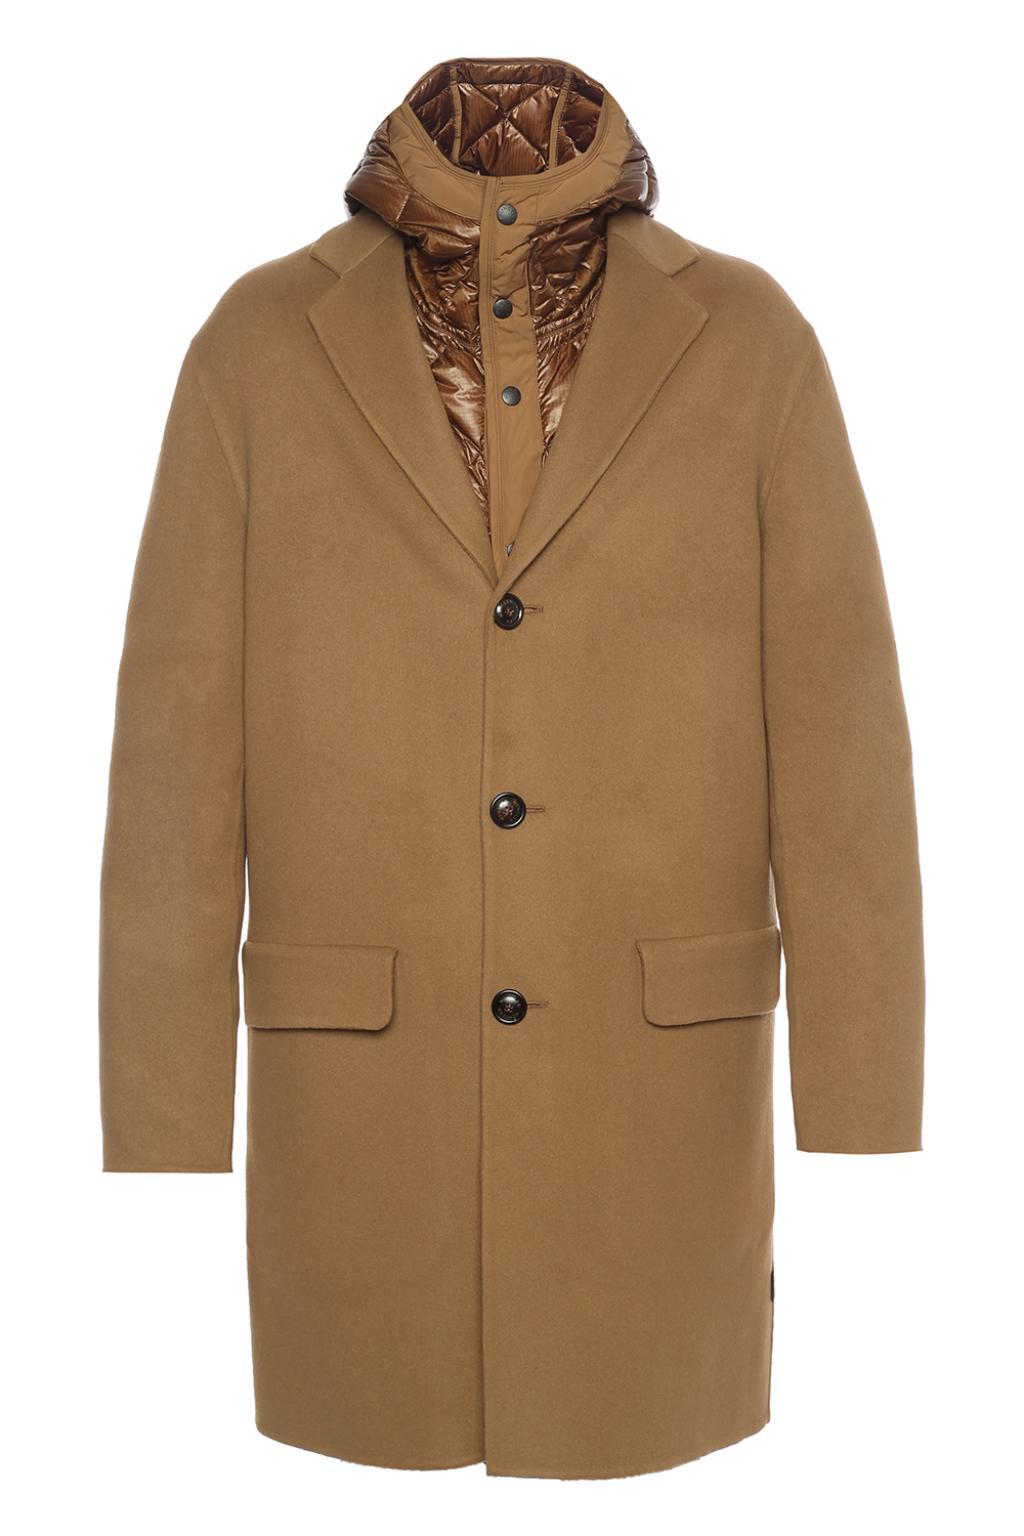 Moncler Wool Coat With Detachable Jacket in Brown for Men - Lyst